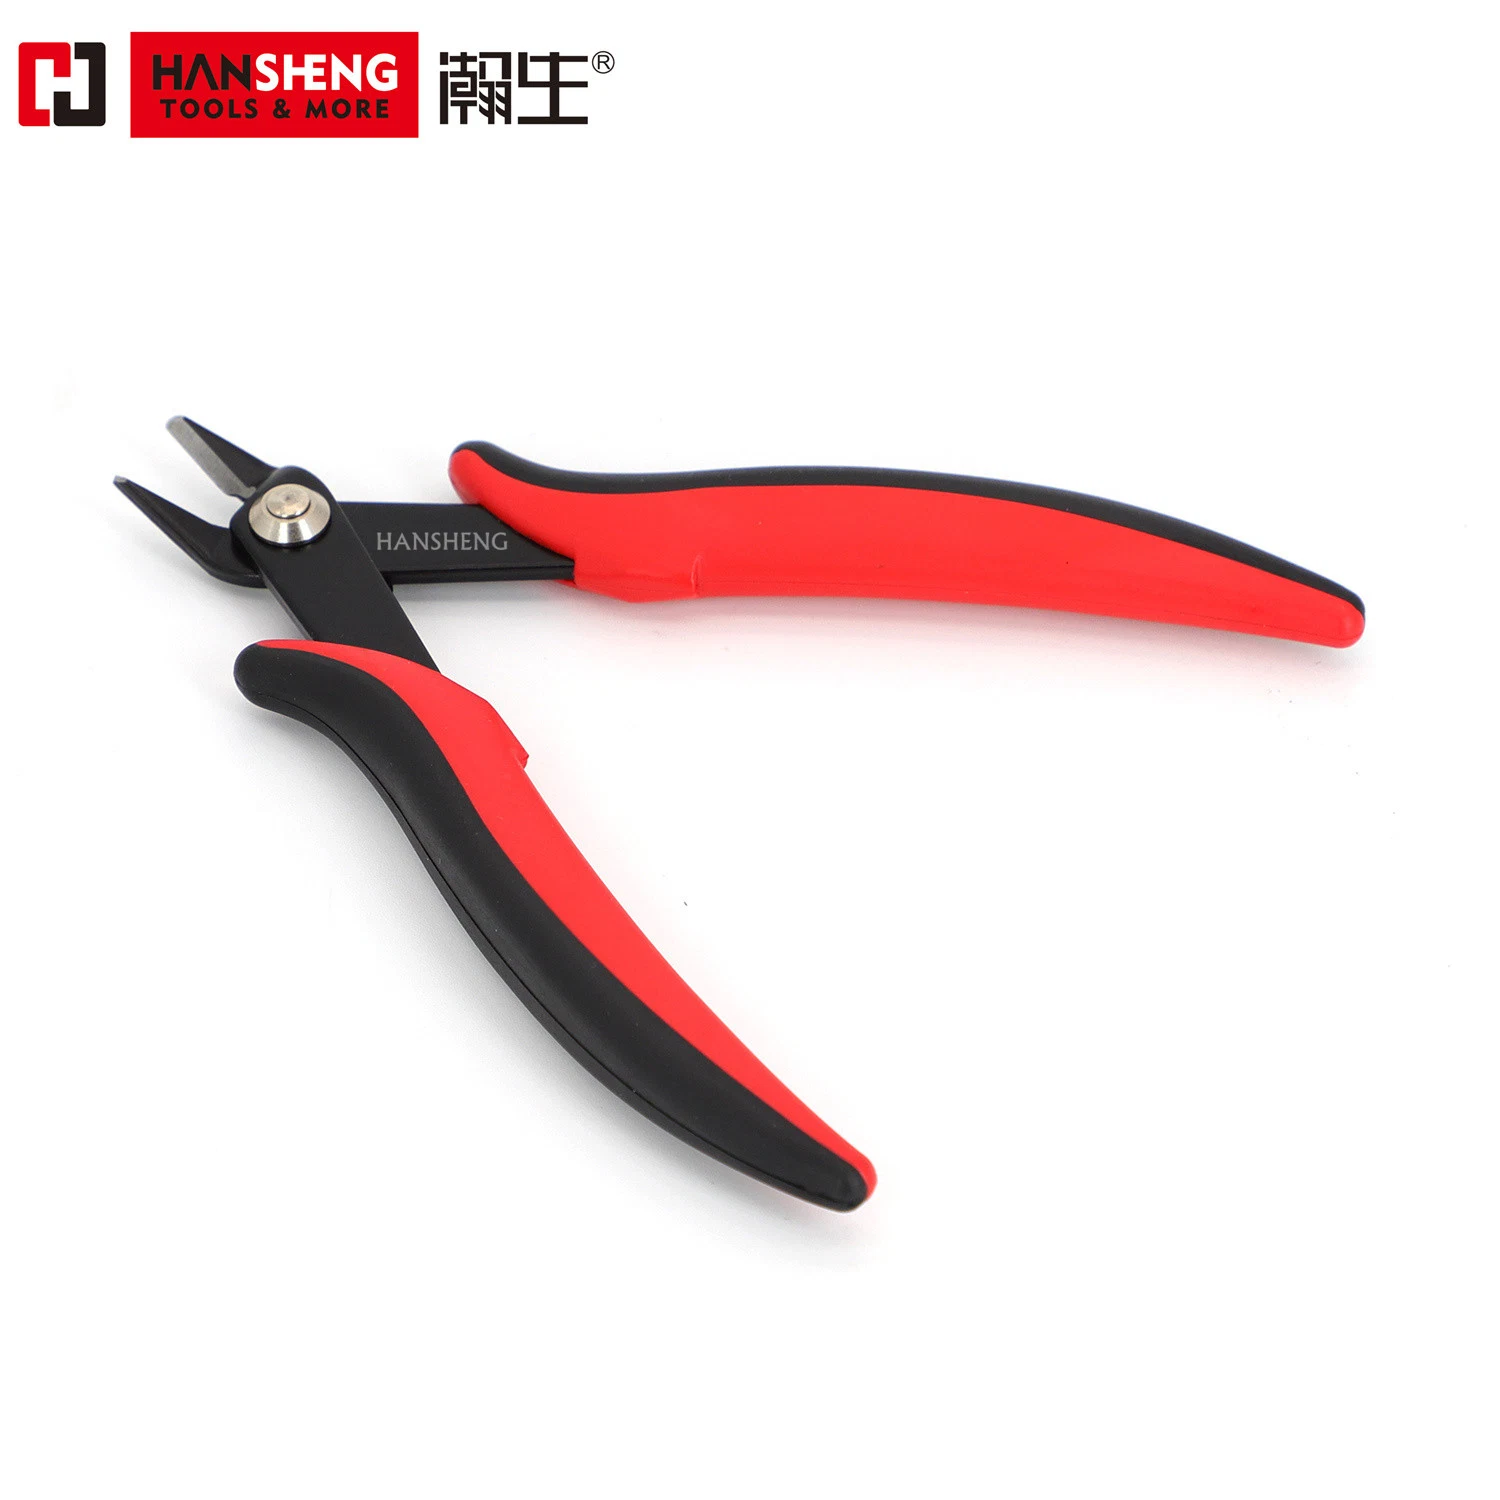 6", 8", Professional Combination Pliers, Hand Tools, Hardware, Made of CRV, Pearl-Nickel Plated, Nickel Plated PVC Handles, German Type, Diagonal Cutting Pliers